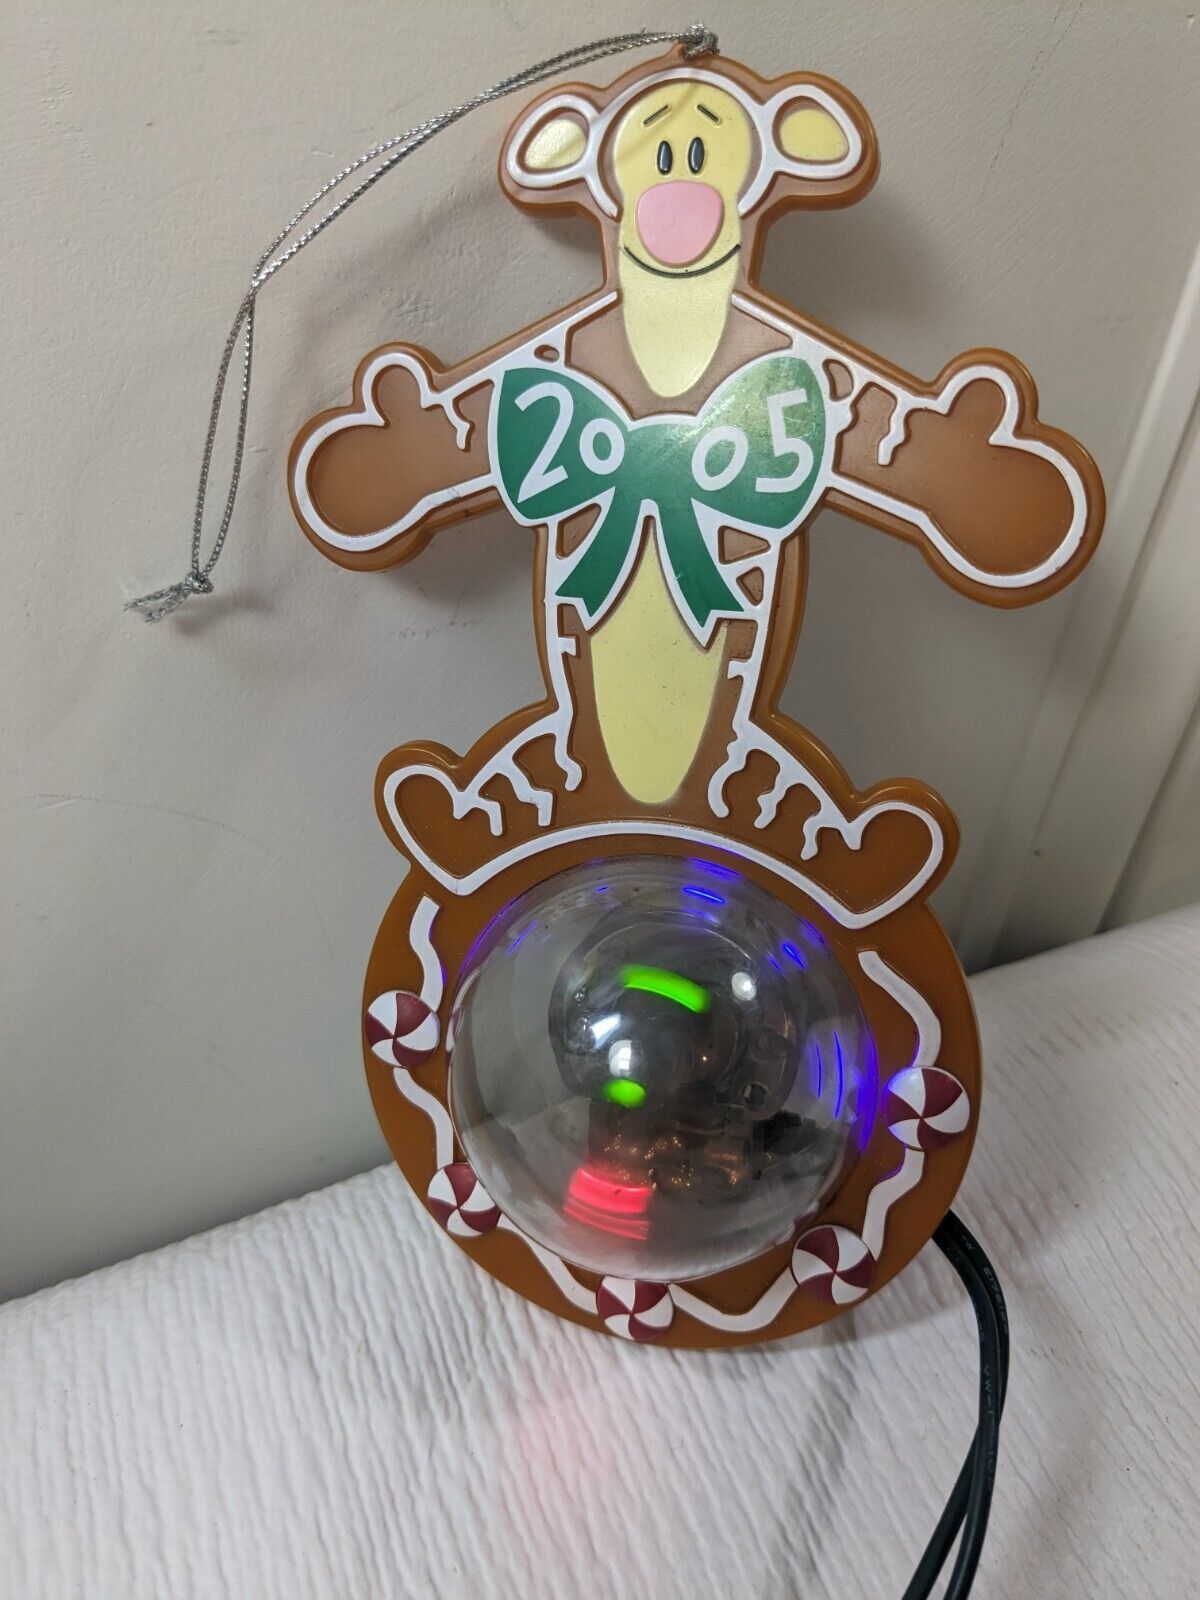 Disney Store Tigger Gingerbread ornament 2005 spinning lights Our Family Tree - $22.00